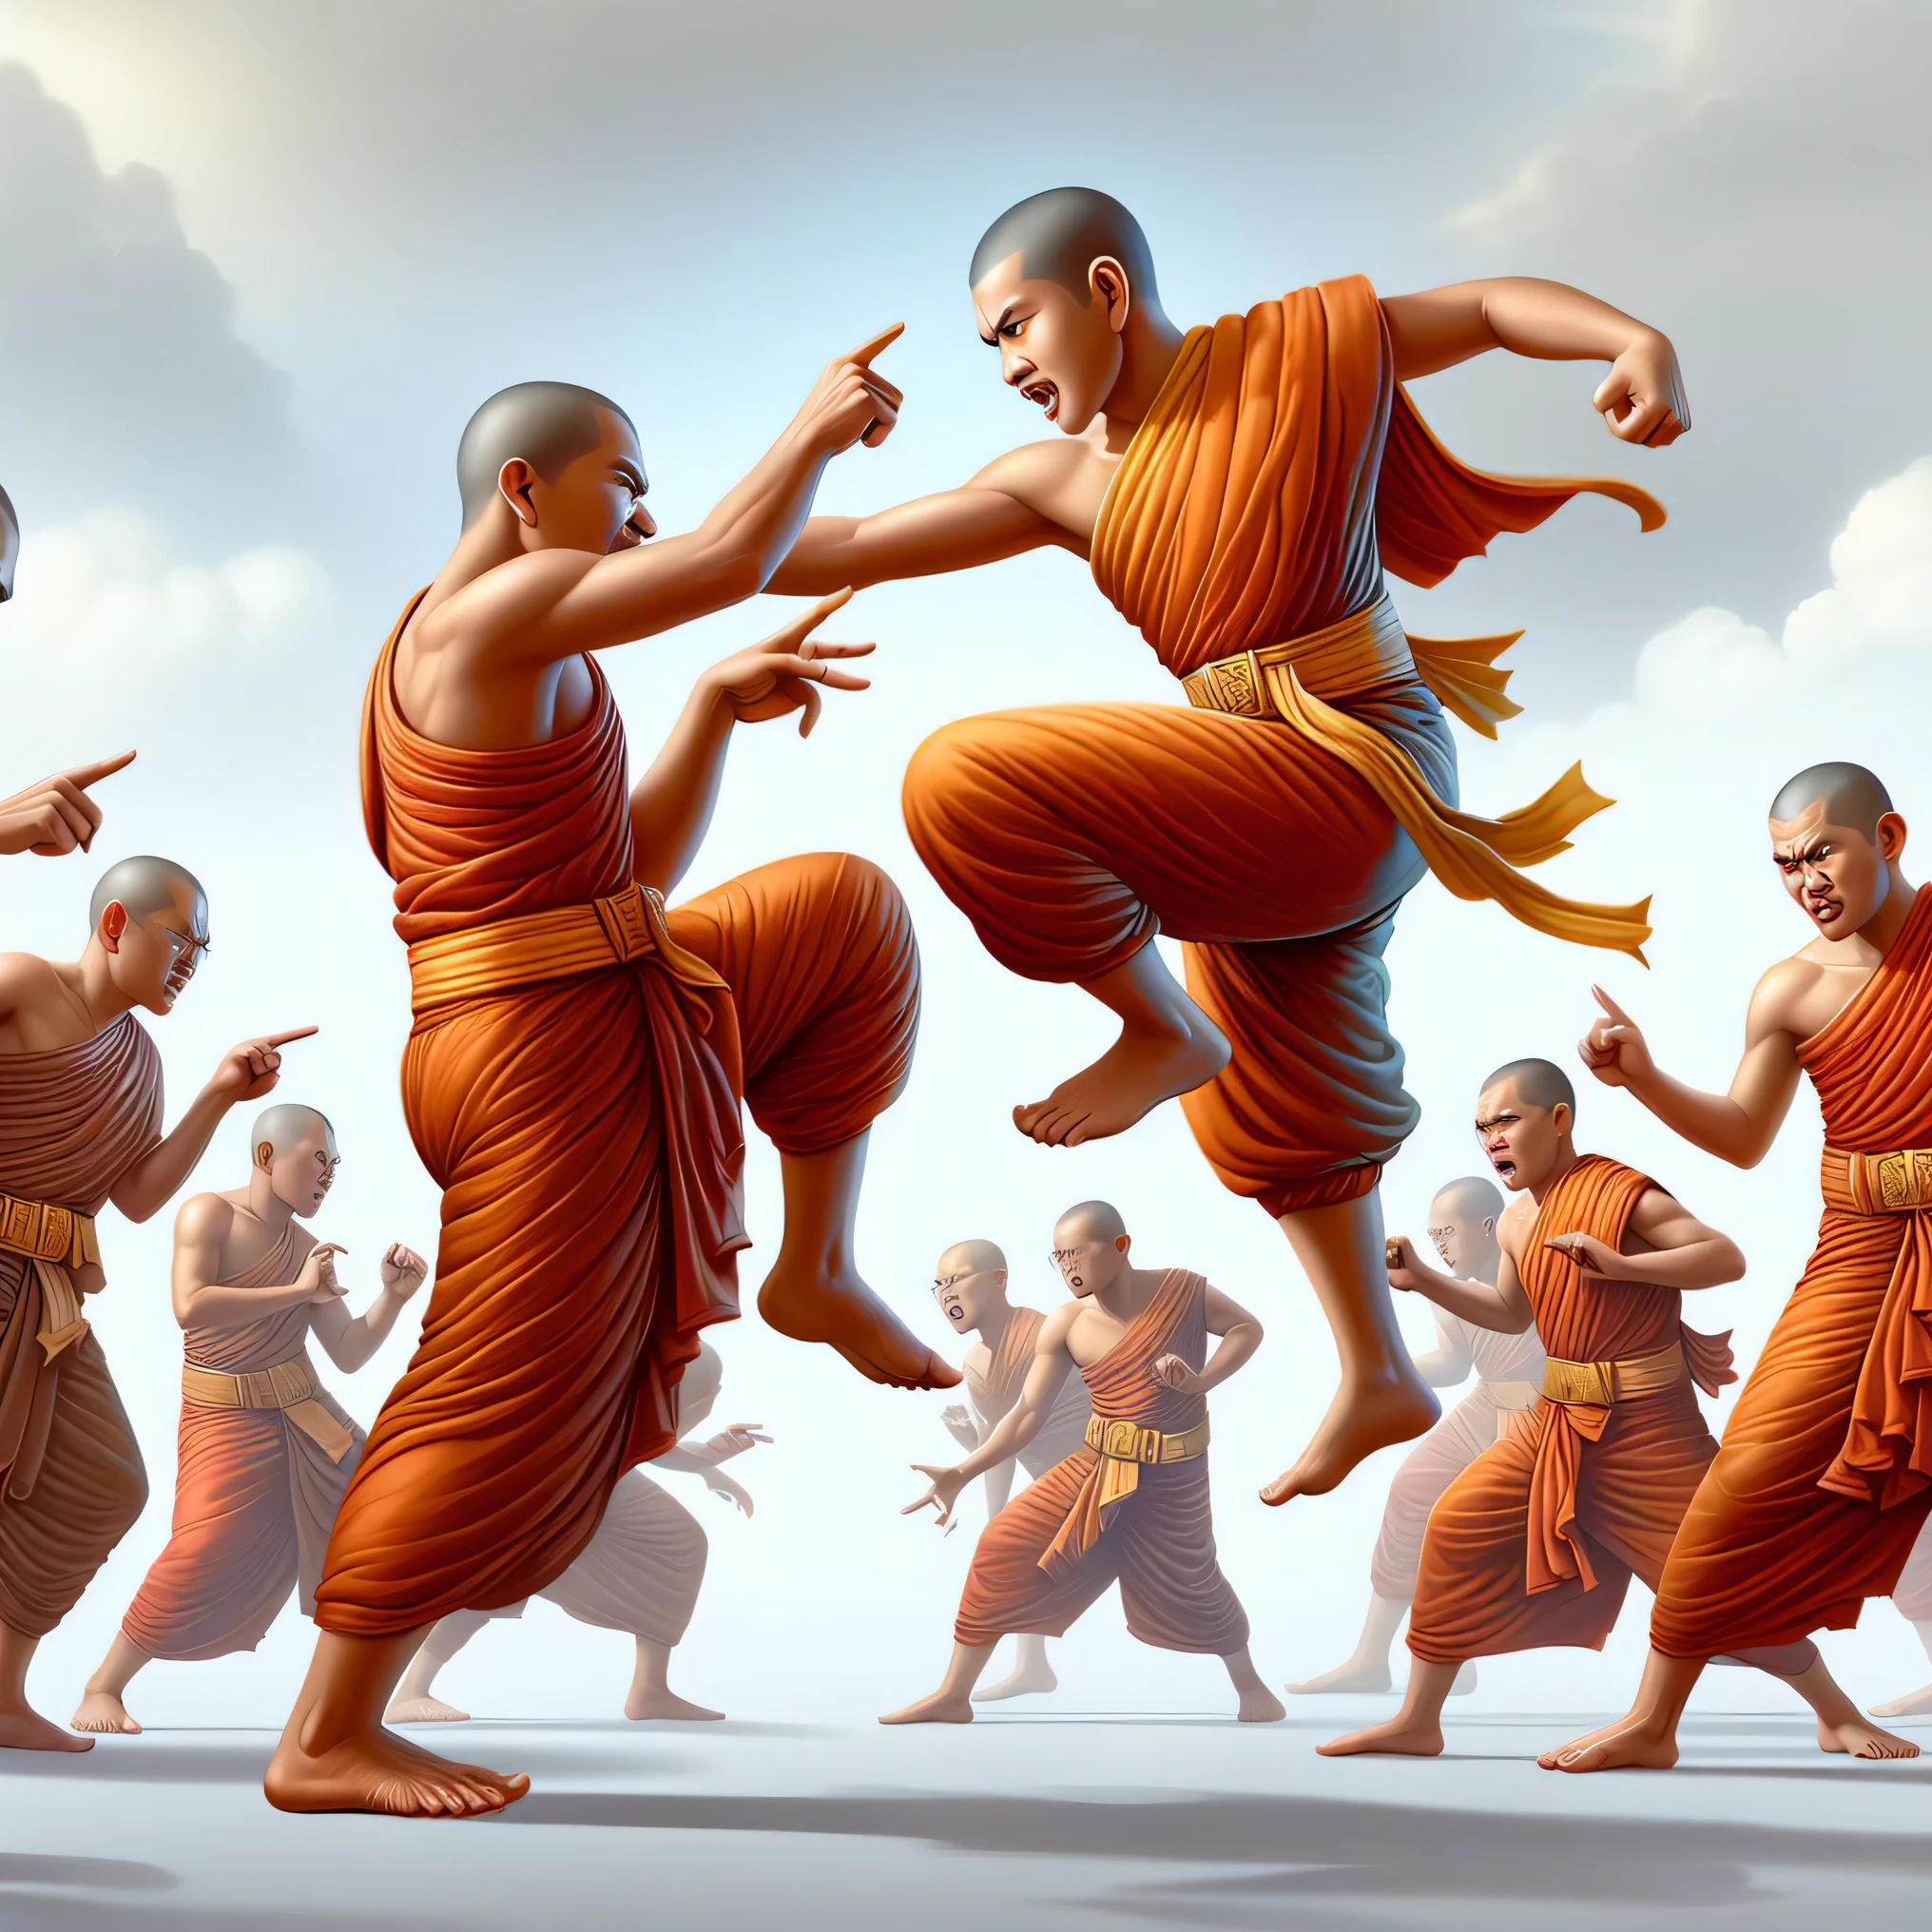 there are many monks doing a martial pose in a group, monks, by